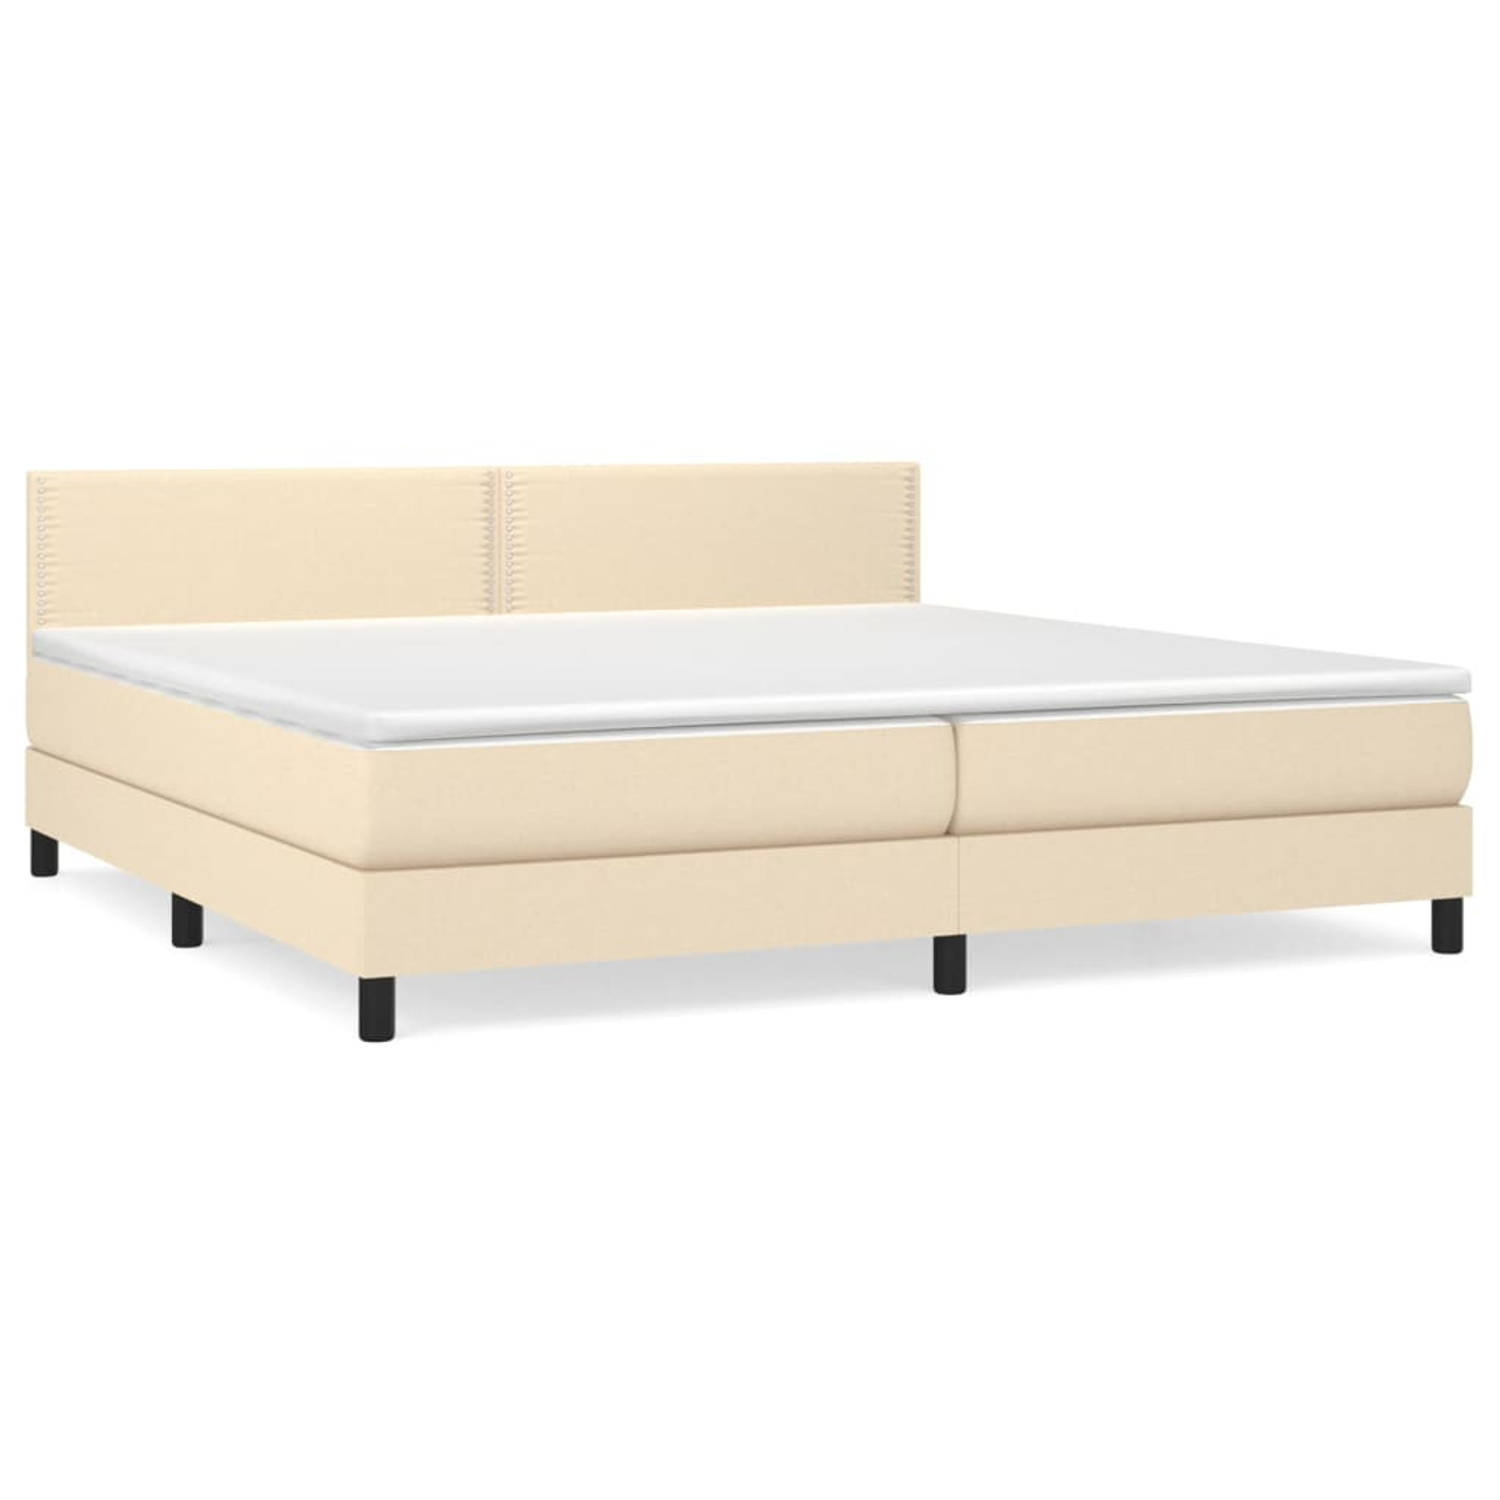 The Living Store Bed The Living Store Boxspringbed - 203 x 200 x 78/88 cm - Pocketvering Matras - Middelharde Ondersteuning